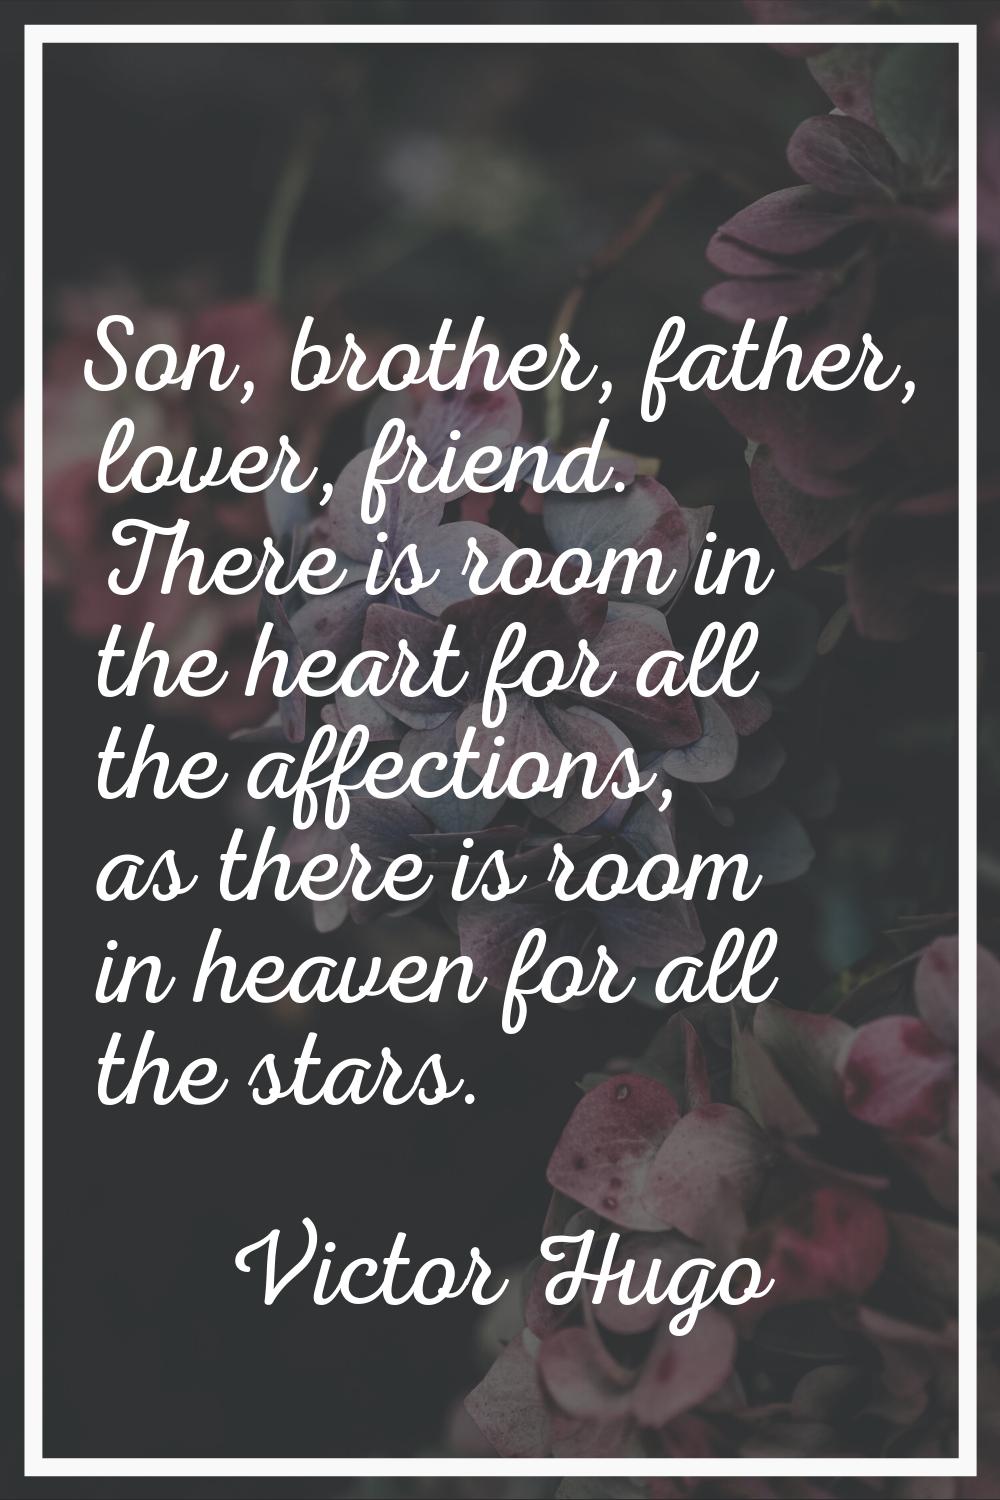 Son, brother, father, lover, friend. There is room in the heart for all the affections, as there is